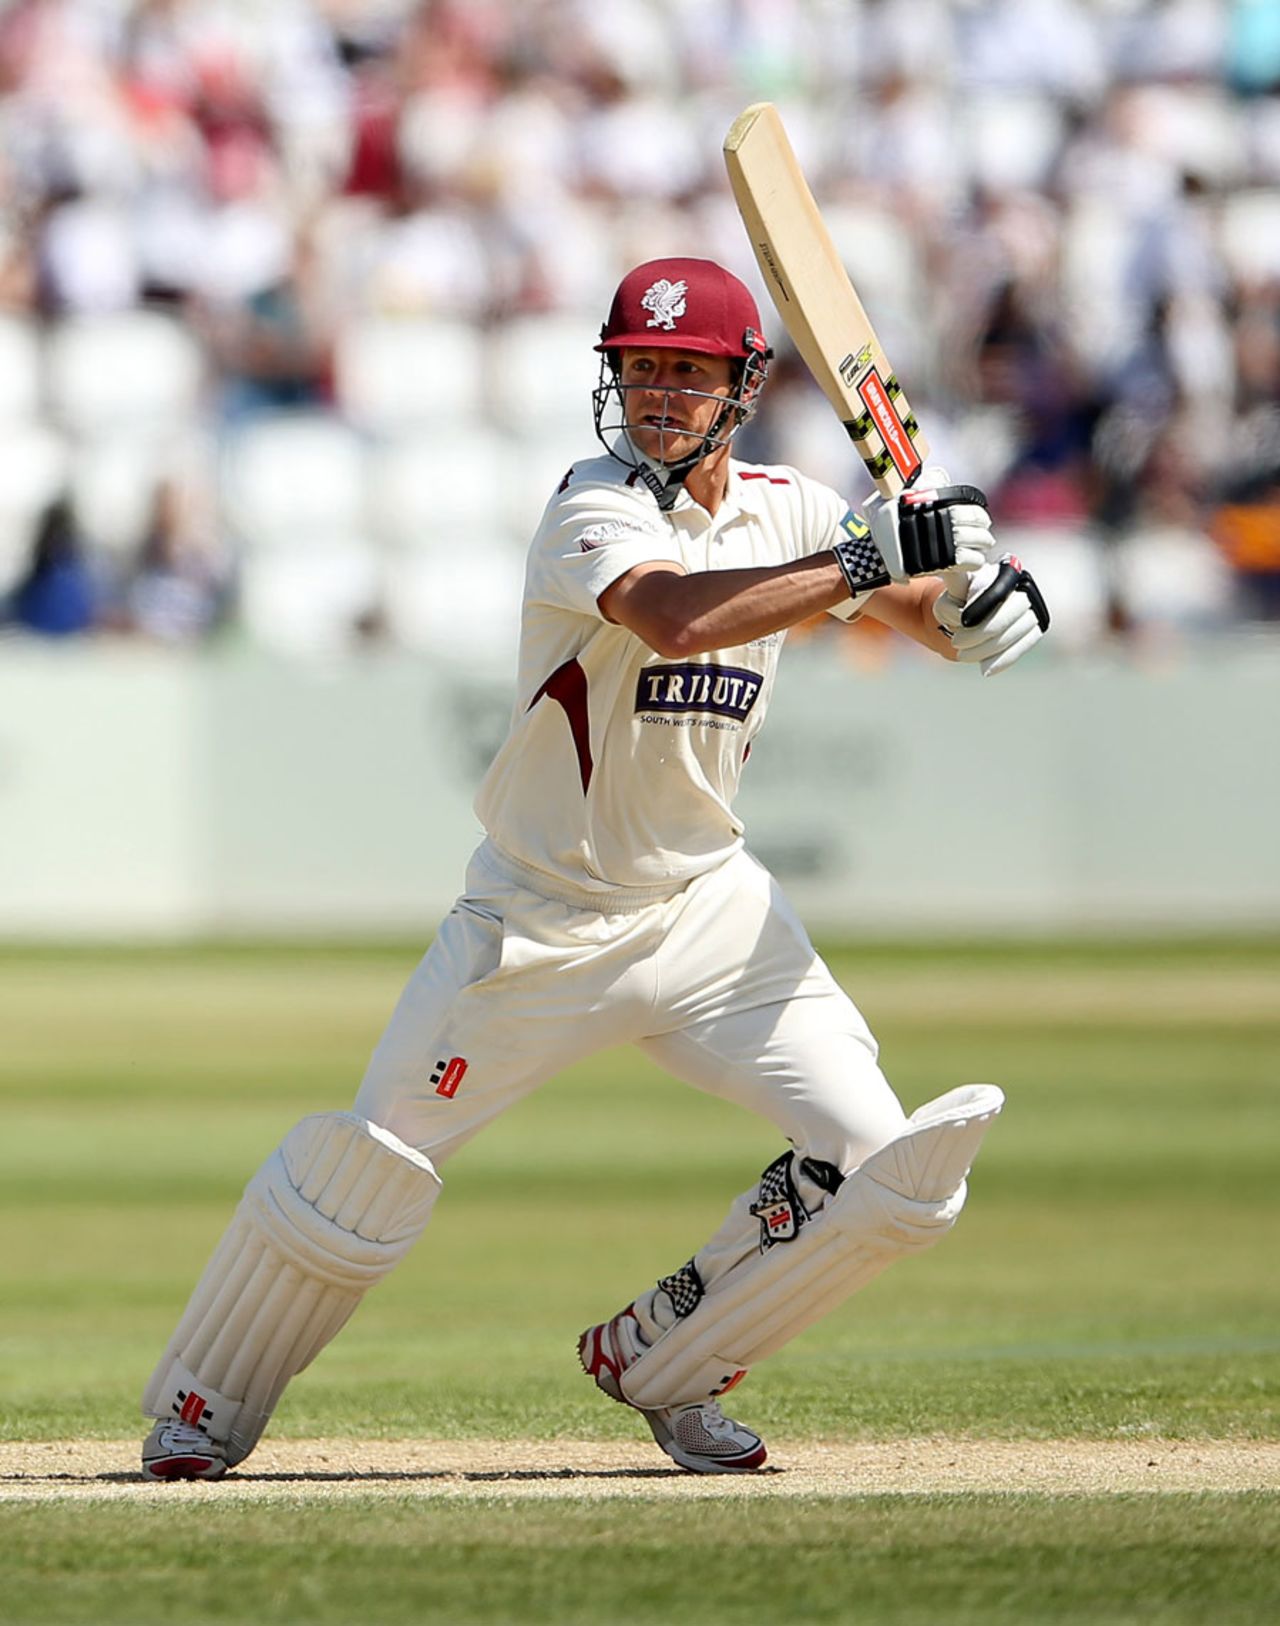 James Hildreth boosted Somerset with 43, Northamptonshire v Somerset, County Championship Division One, Northampton, 3rd day, July 14, 2014